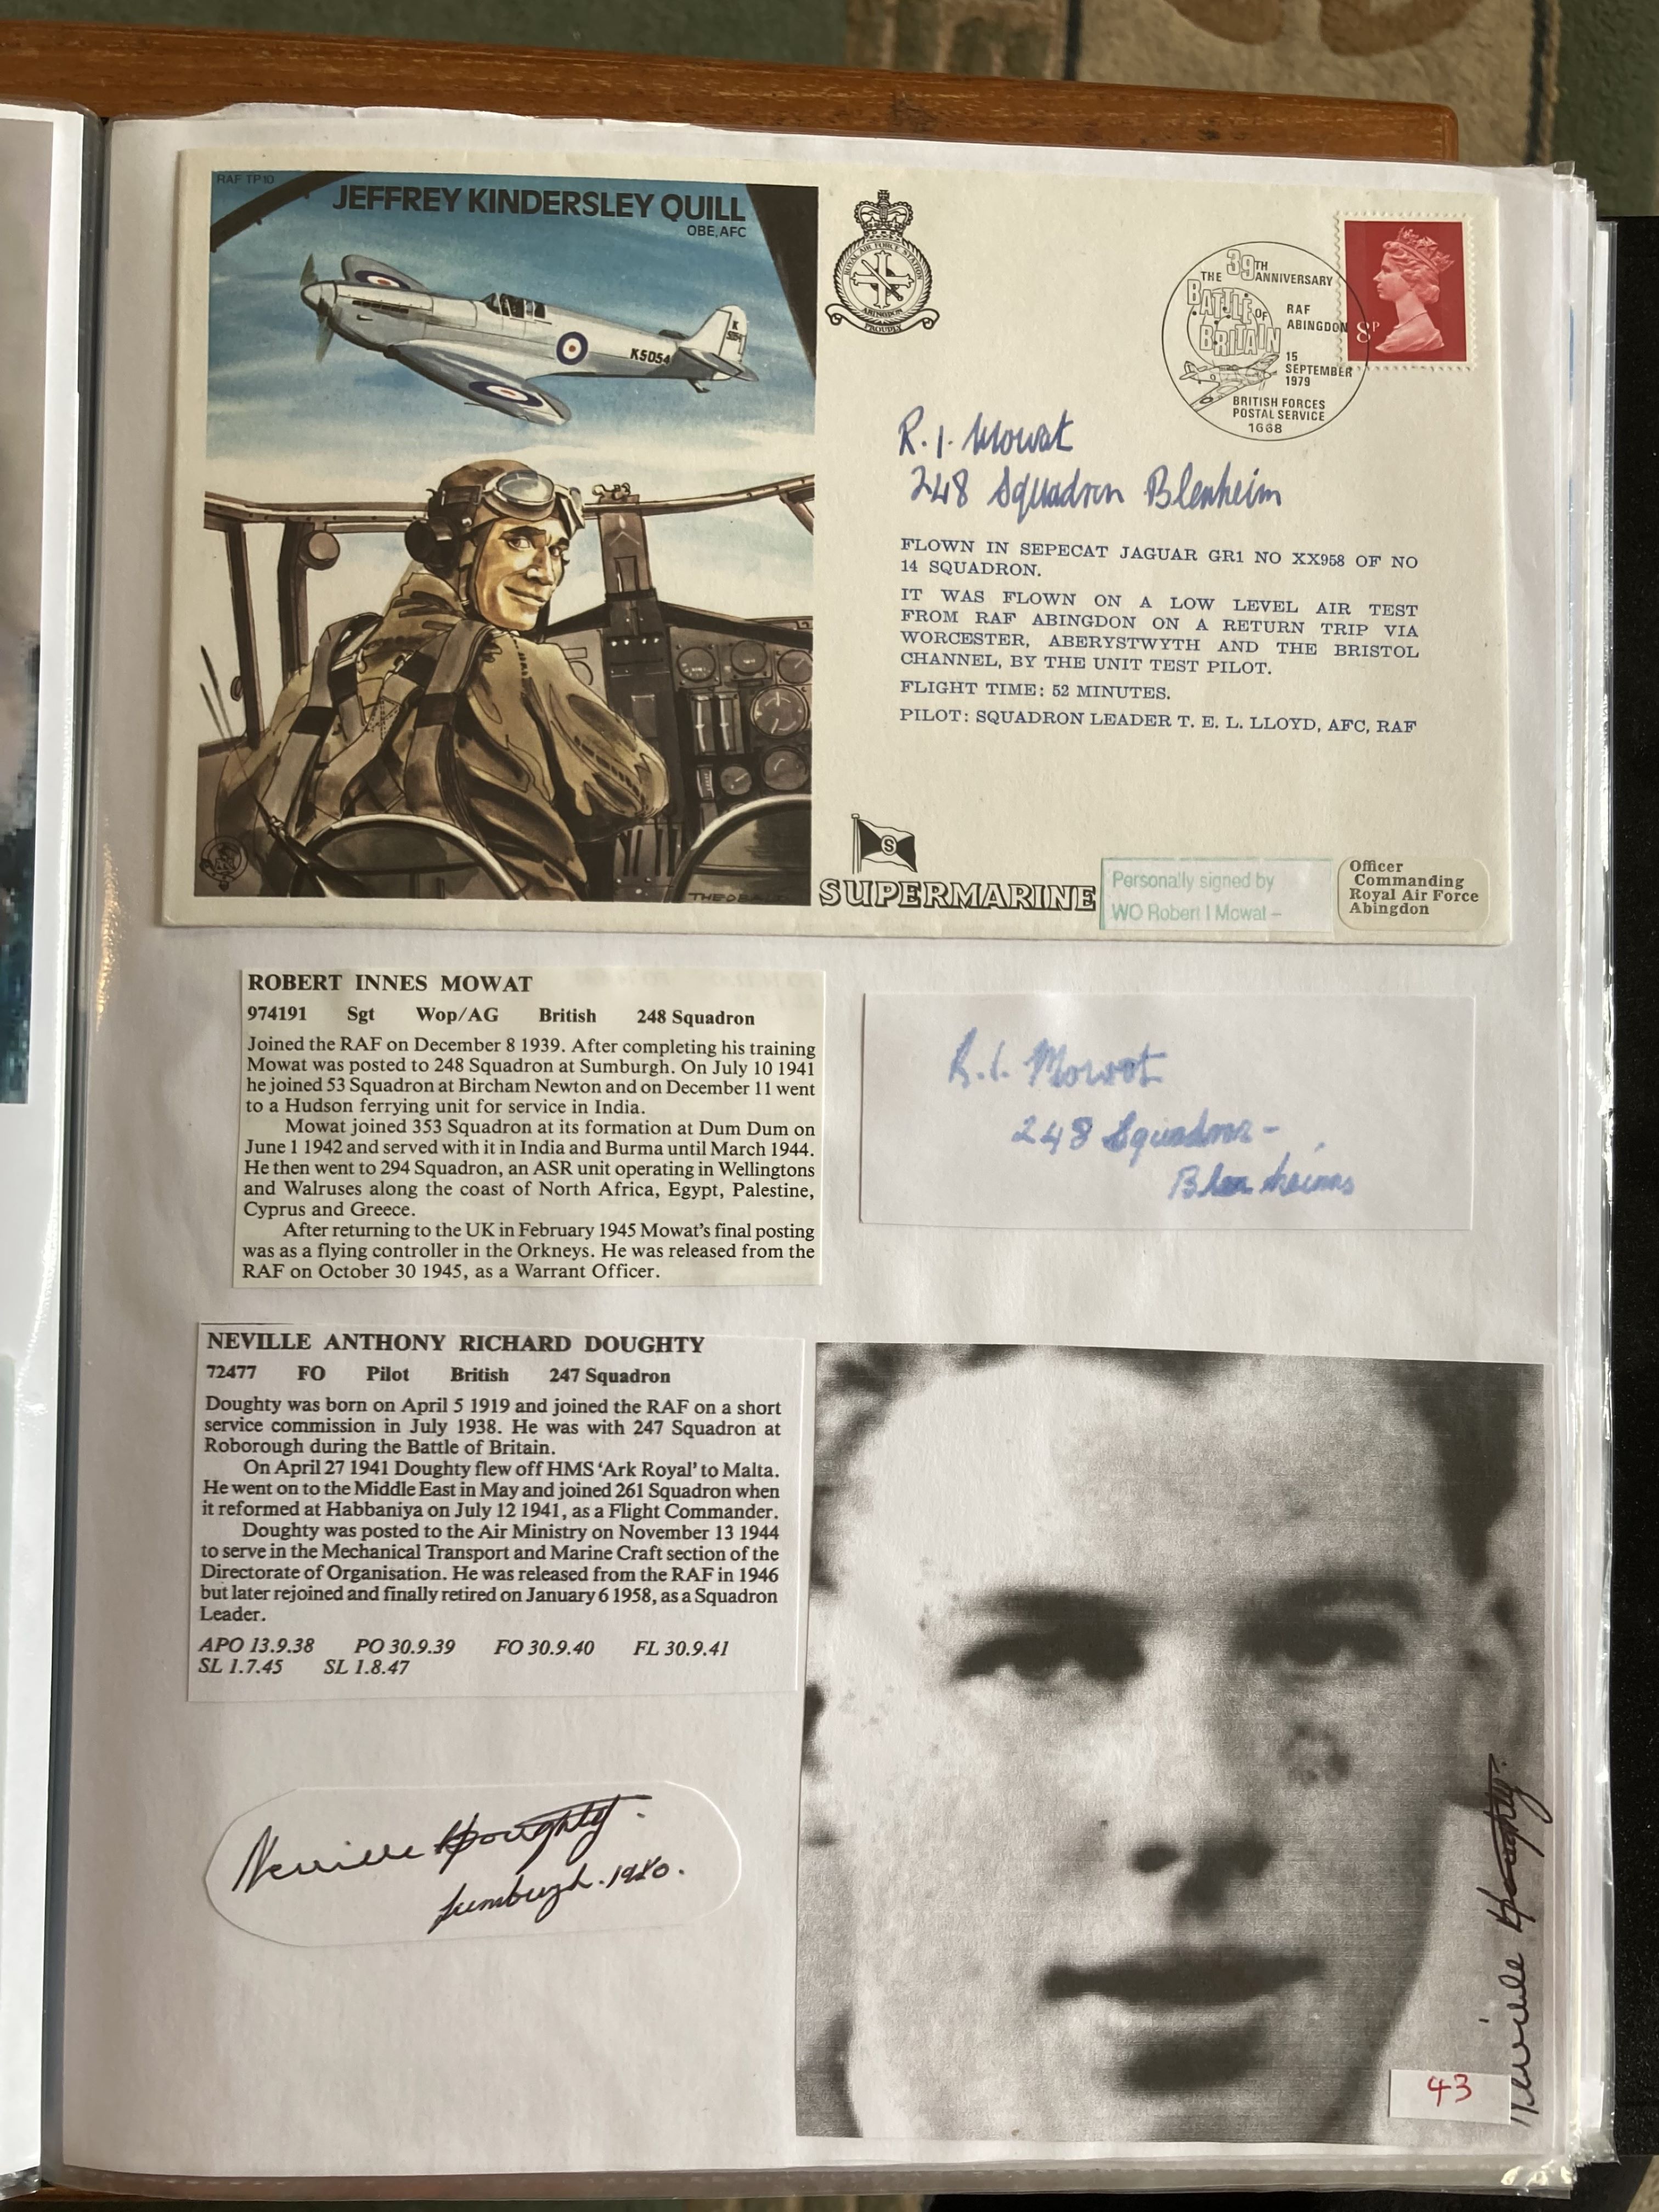 WW2 BOB fighter pilot Robert Mowat 248 sqn signed Jeffrey Quill cover and signature of Neville